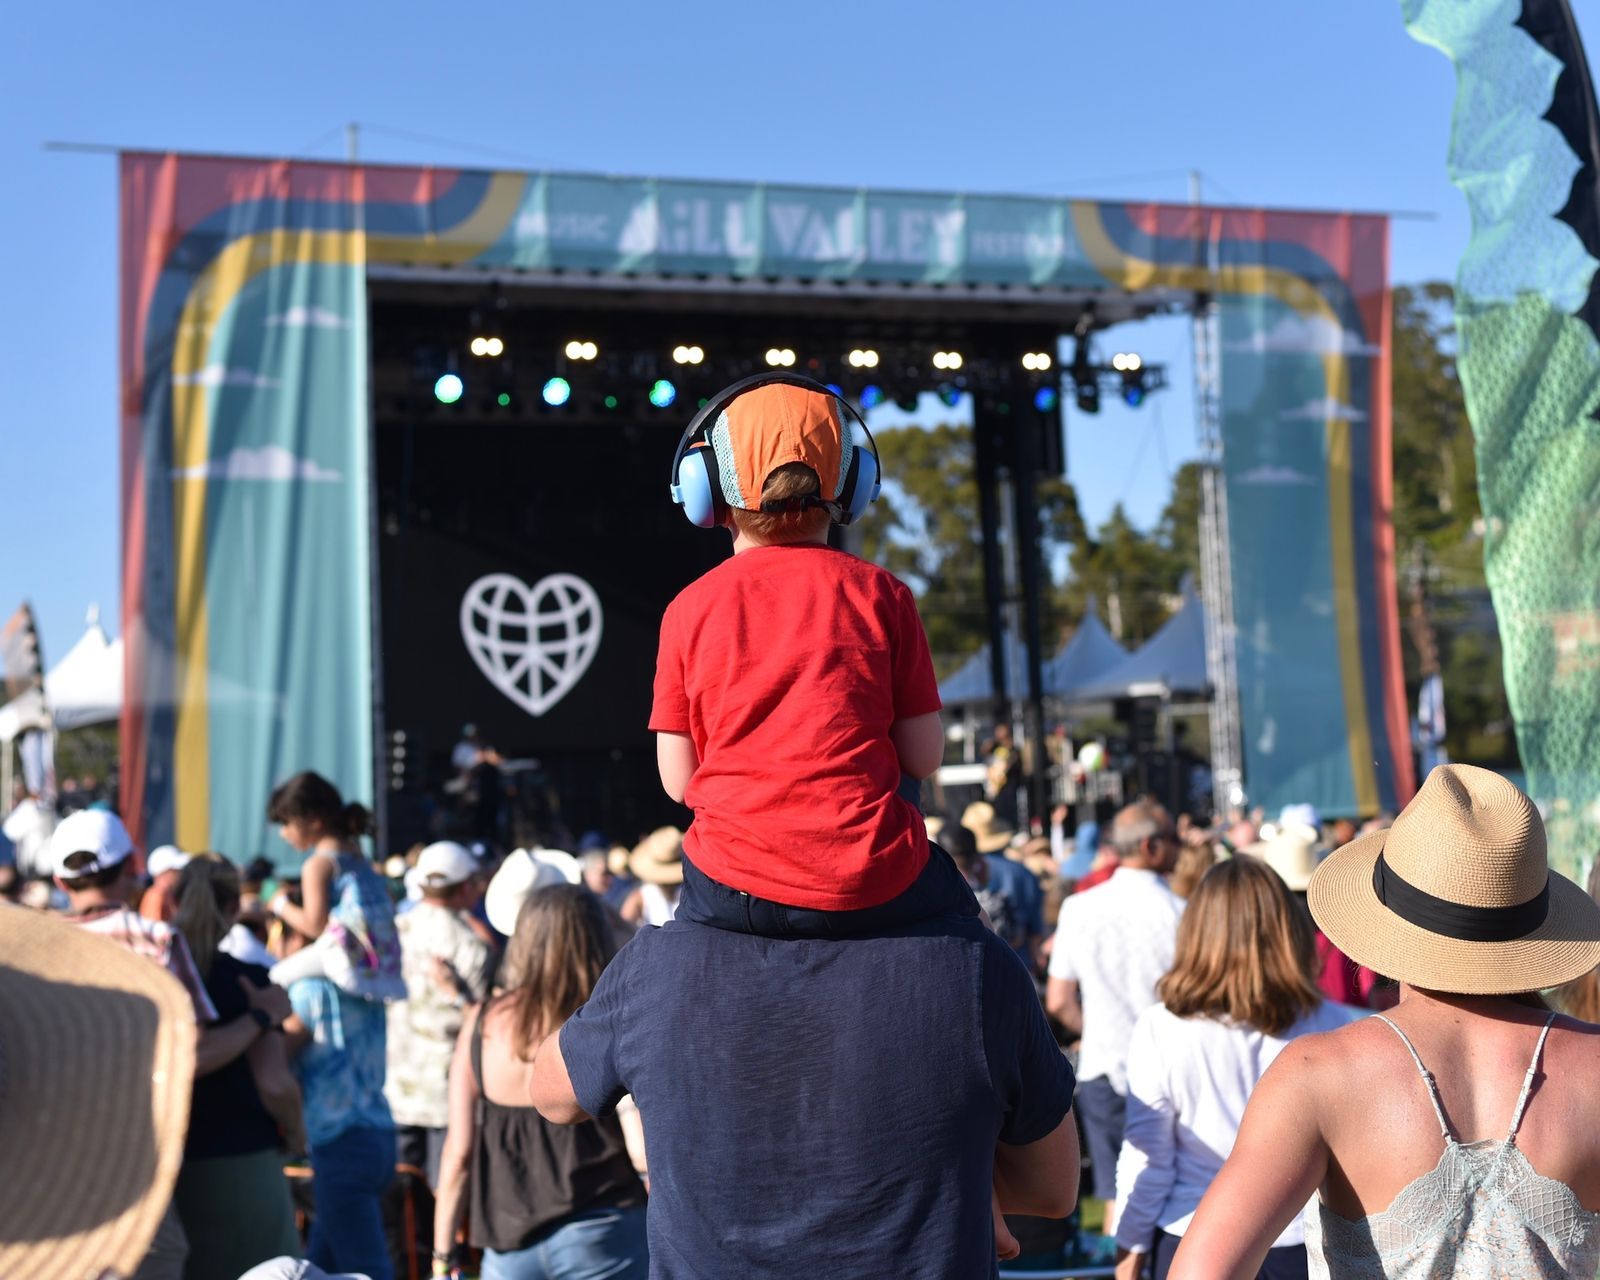 A child in a red shirt and headphones sits on an adult's shoulders at an outdoor festival, facing a stage with a heart logo.